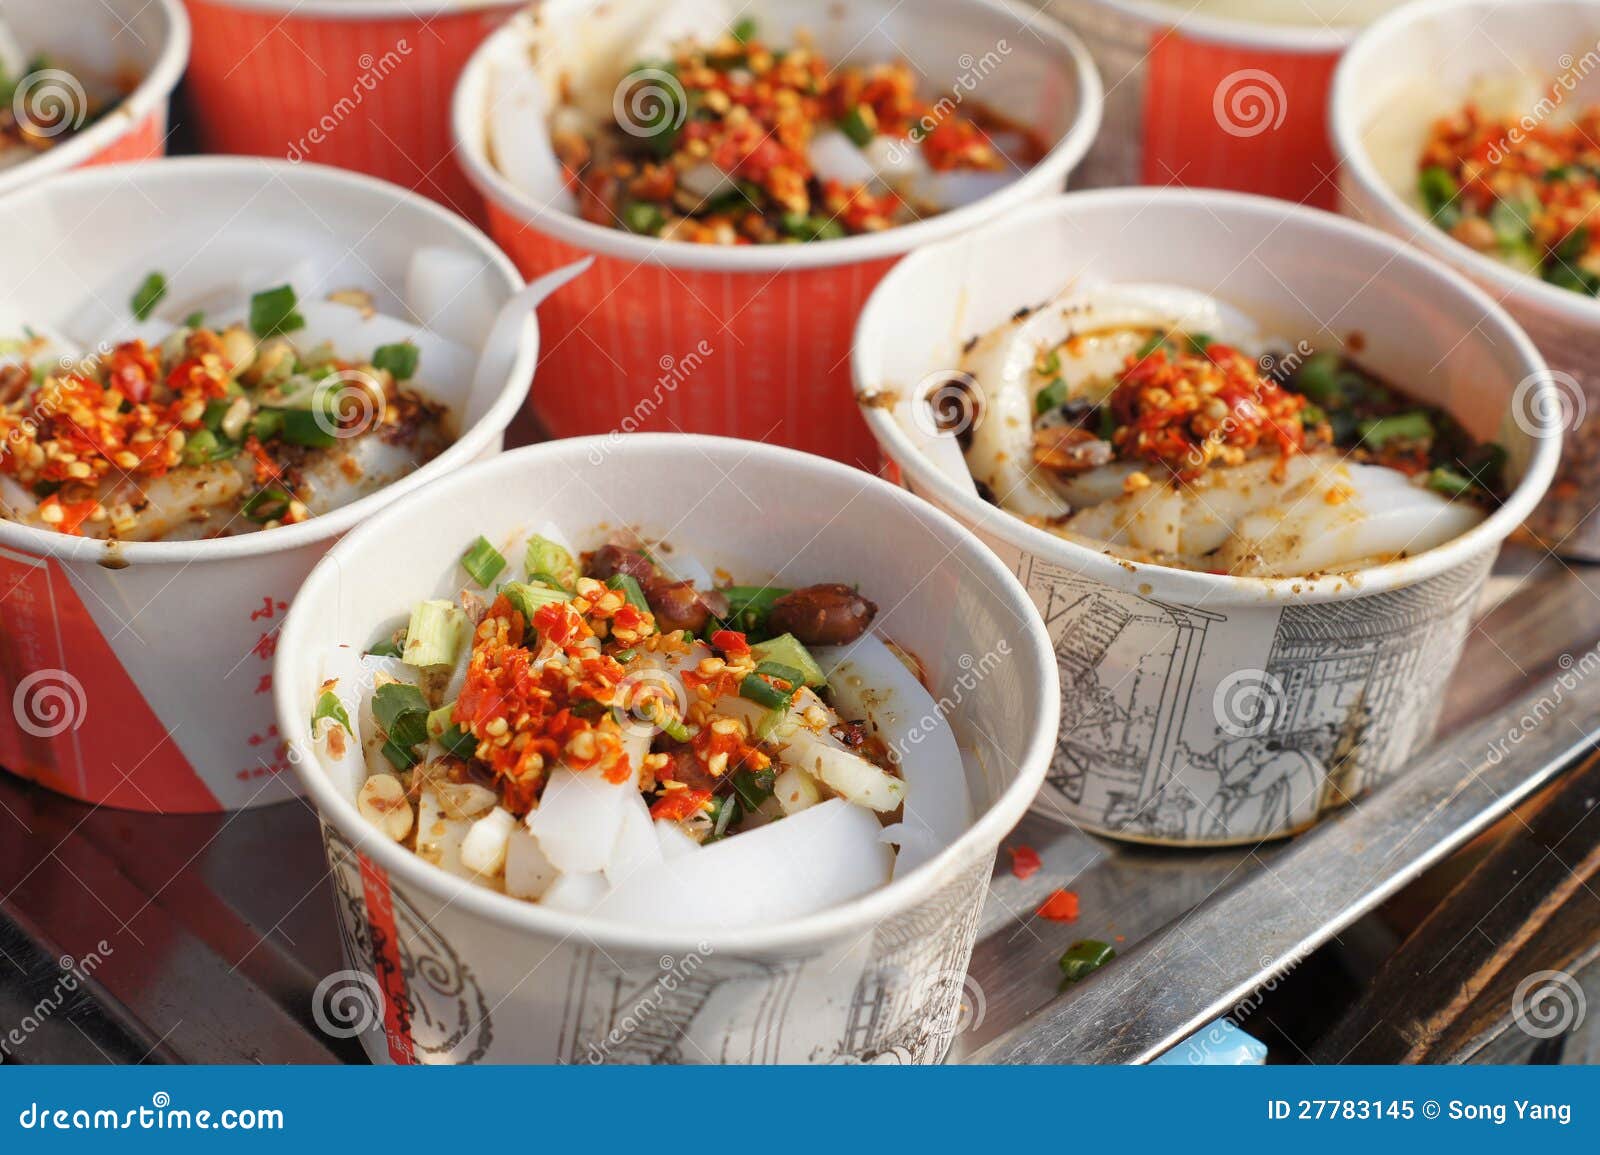 Chinese Cold Dish - Bean Jelly Royalty Free Stock Photo - Image: 27783145